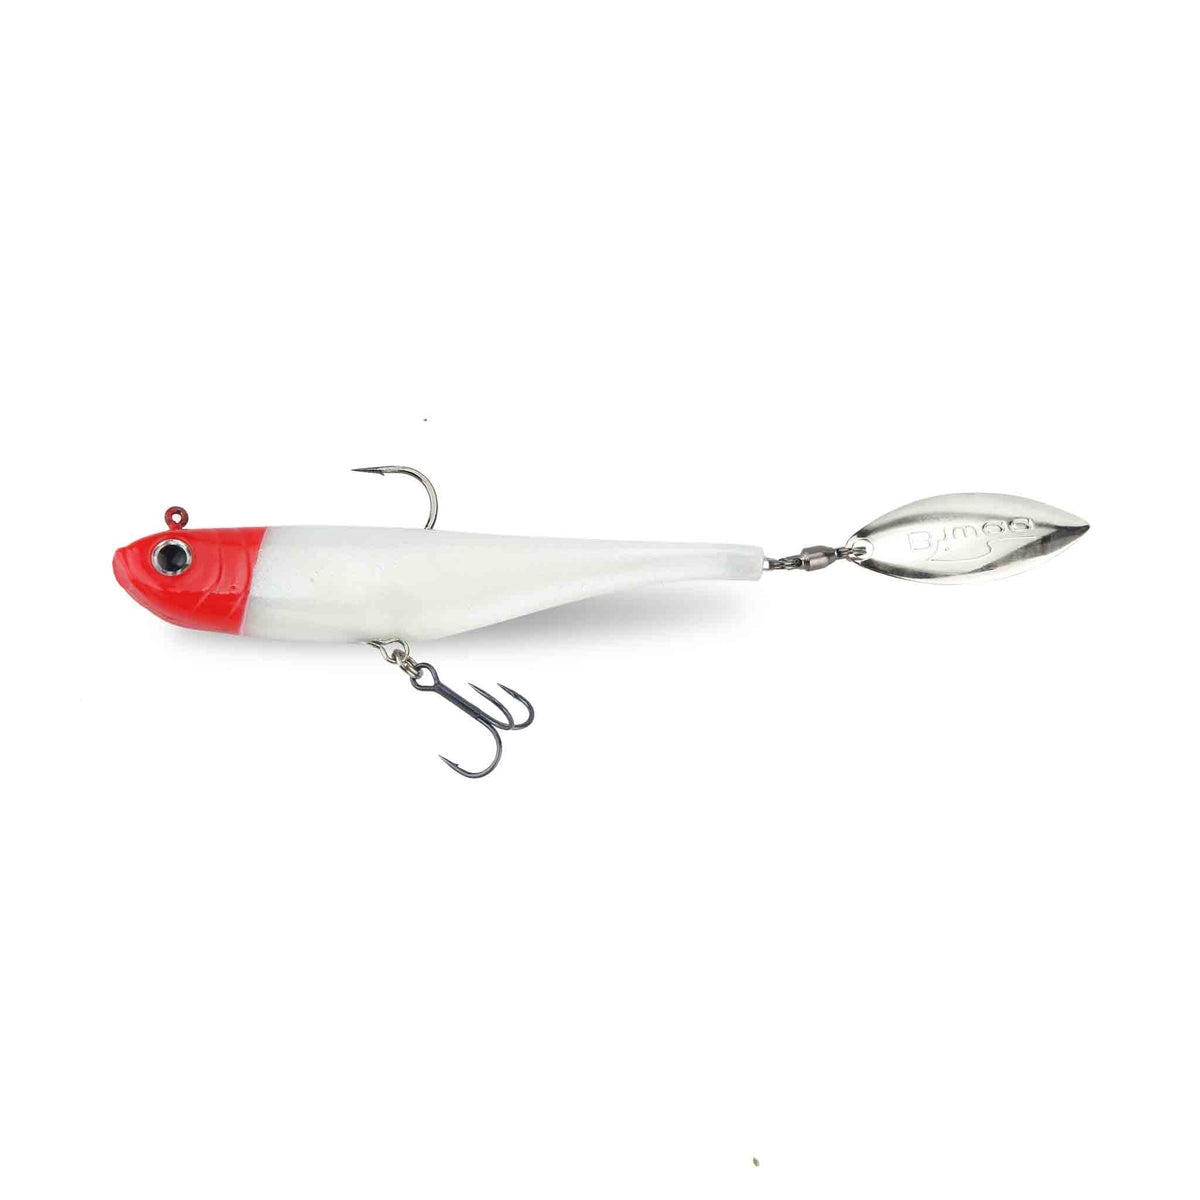 View of Swimbaits Biwaa Divinator 55g Tailspin Swimbait Red Head available at EZOKO Pike and Musky Shop